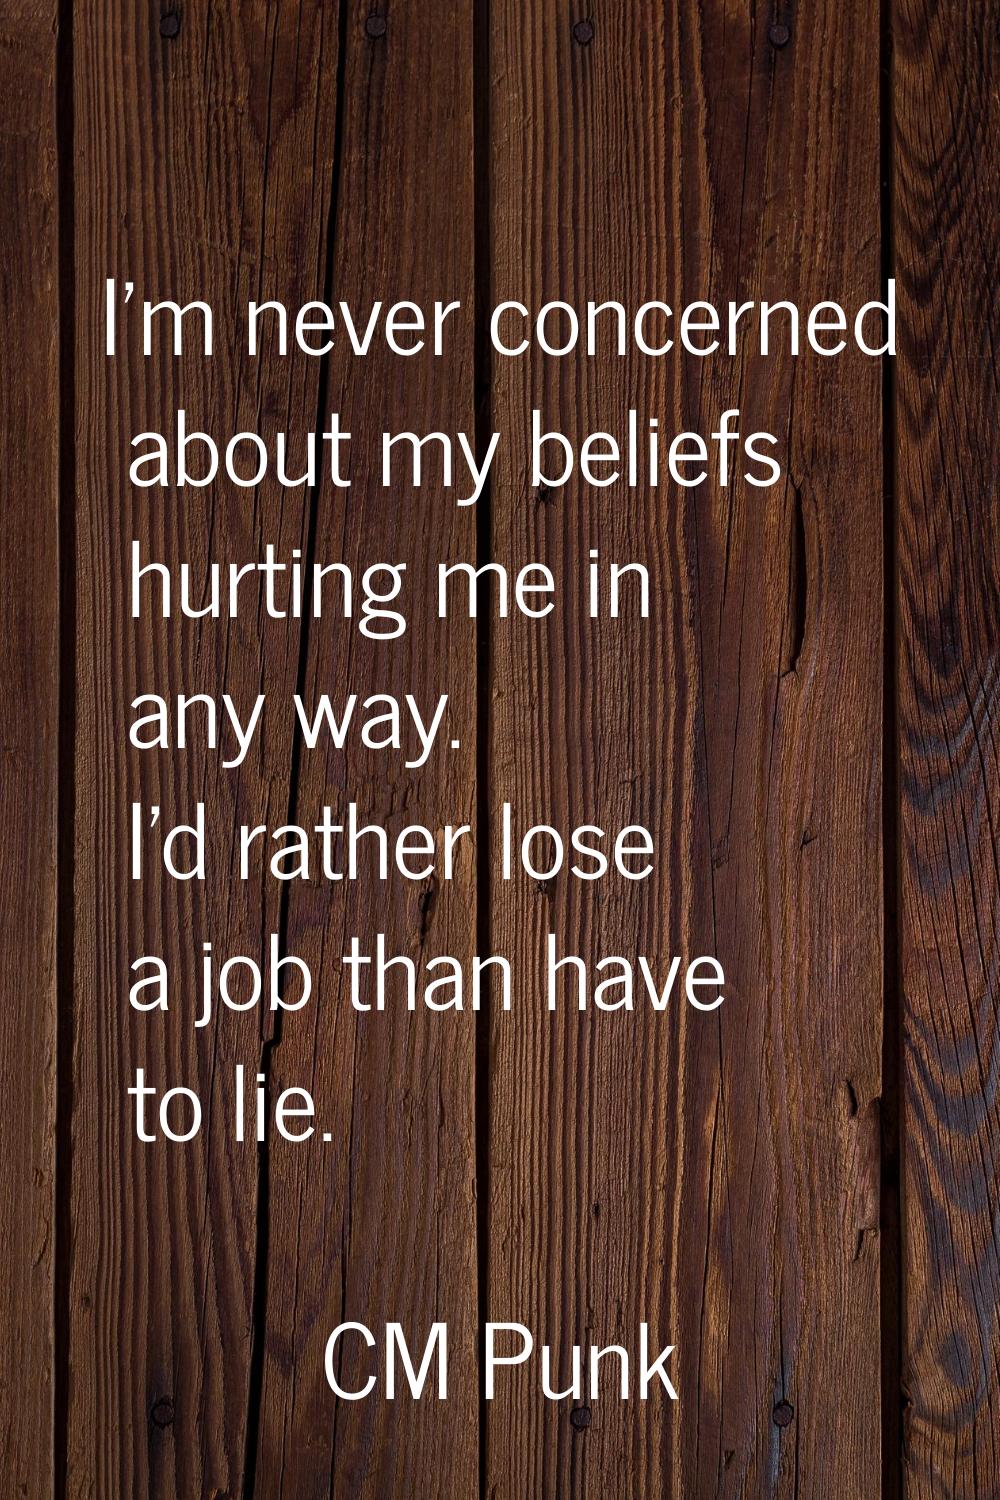 I'm never concerned about my beliefs hurting me in any way. I'd rather lose a job than have to lie.